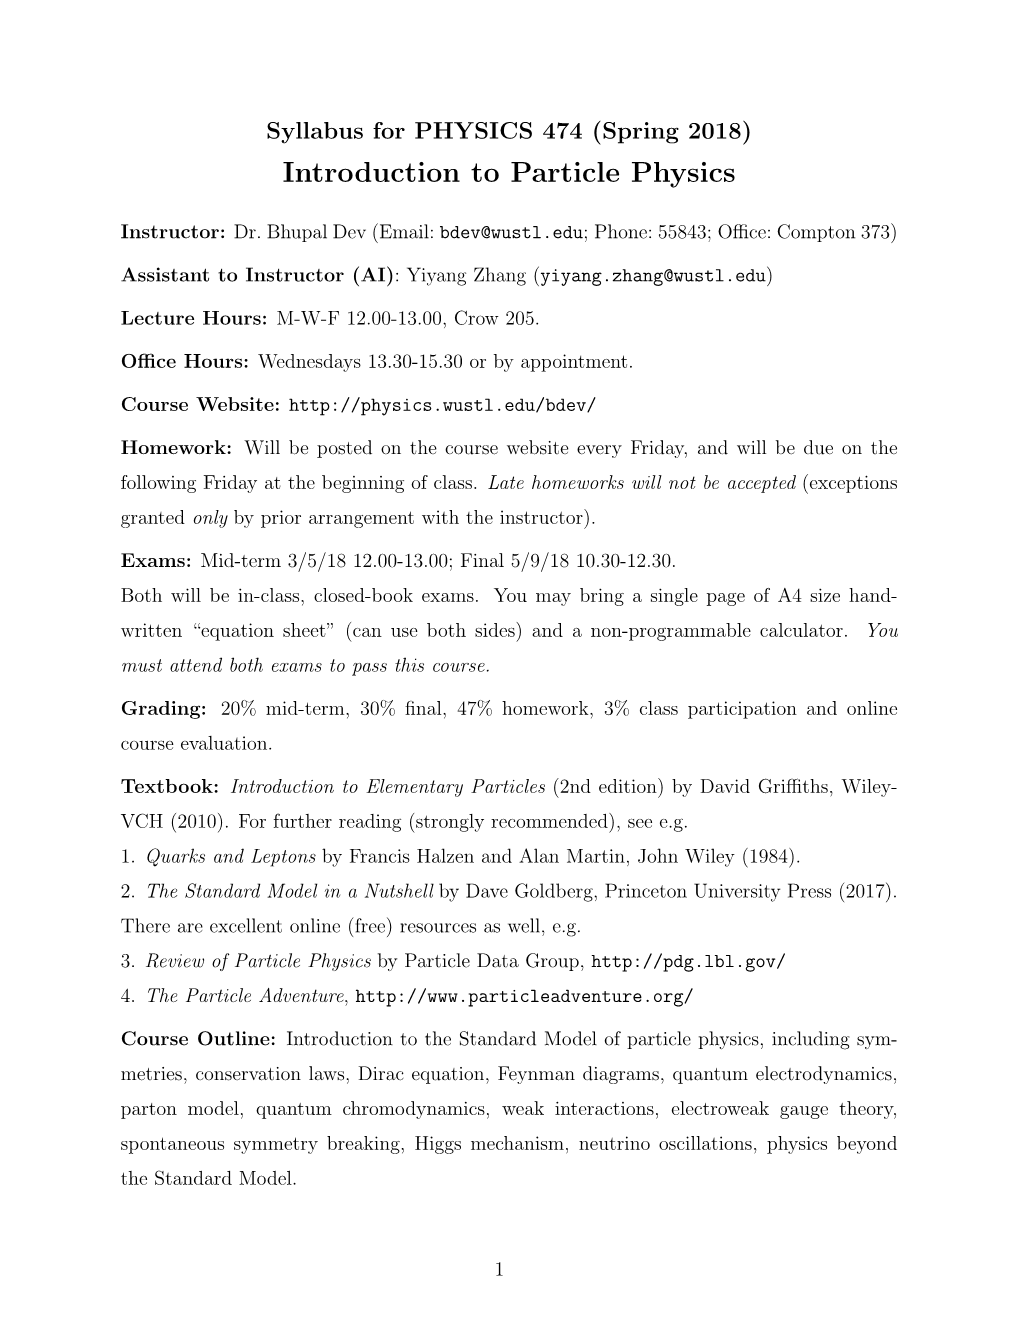 Syllabus for PHYSICS 474 (Spring 2018) Introduction to Particle Physics